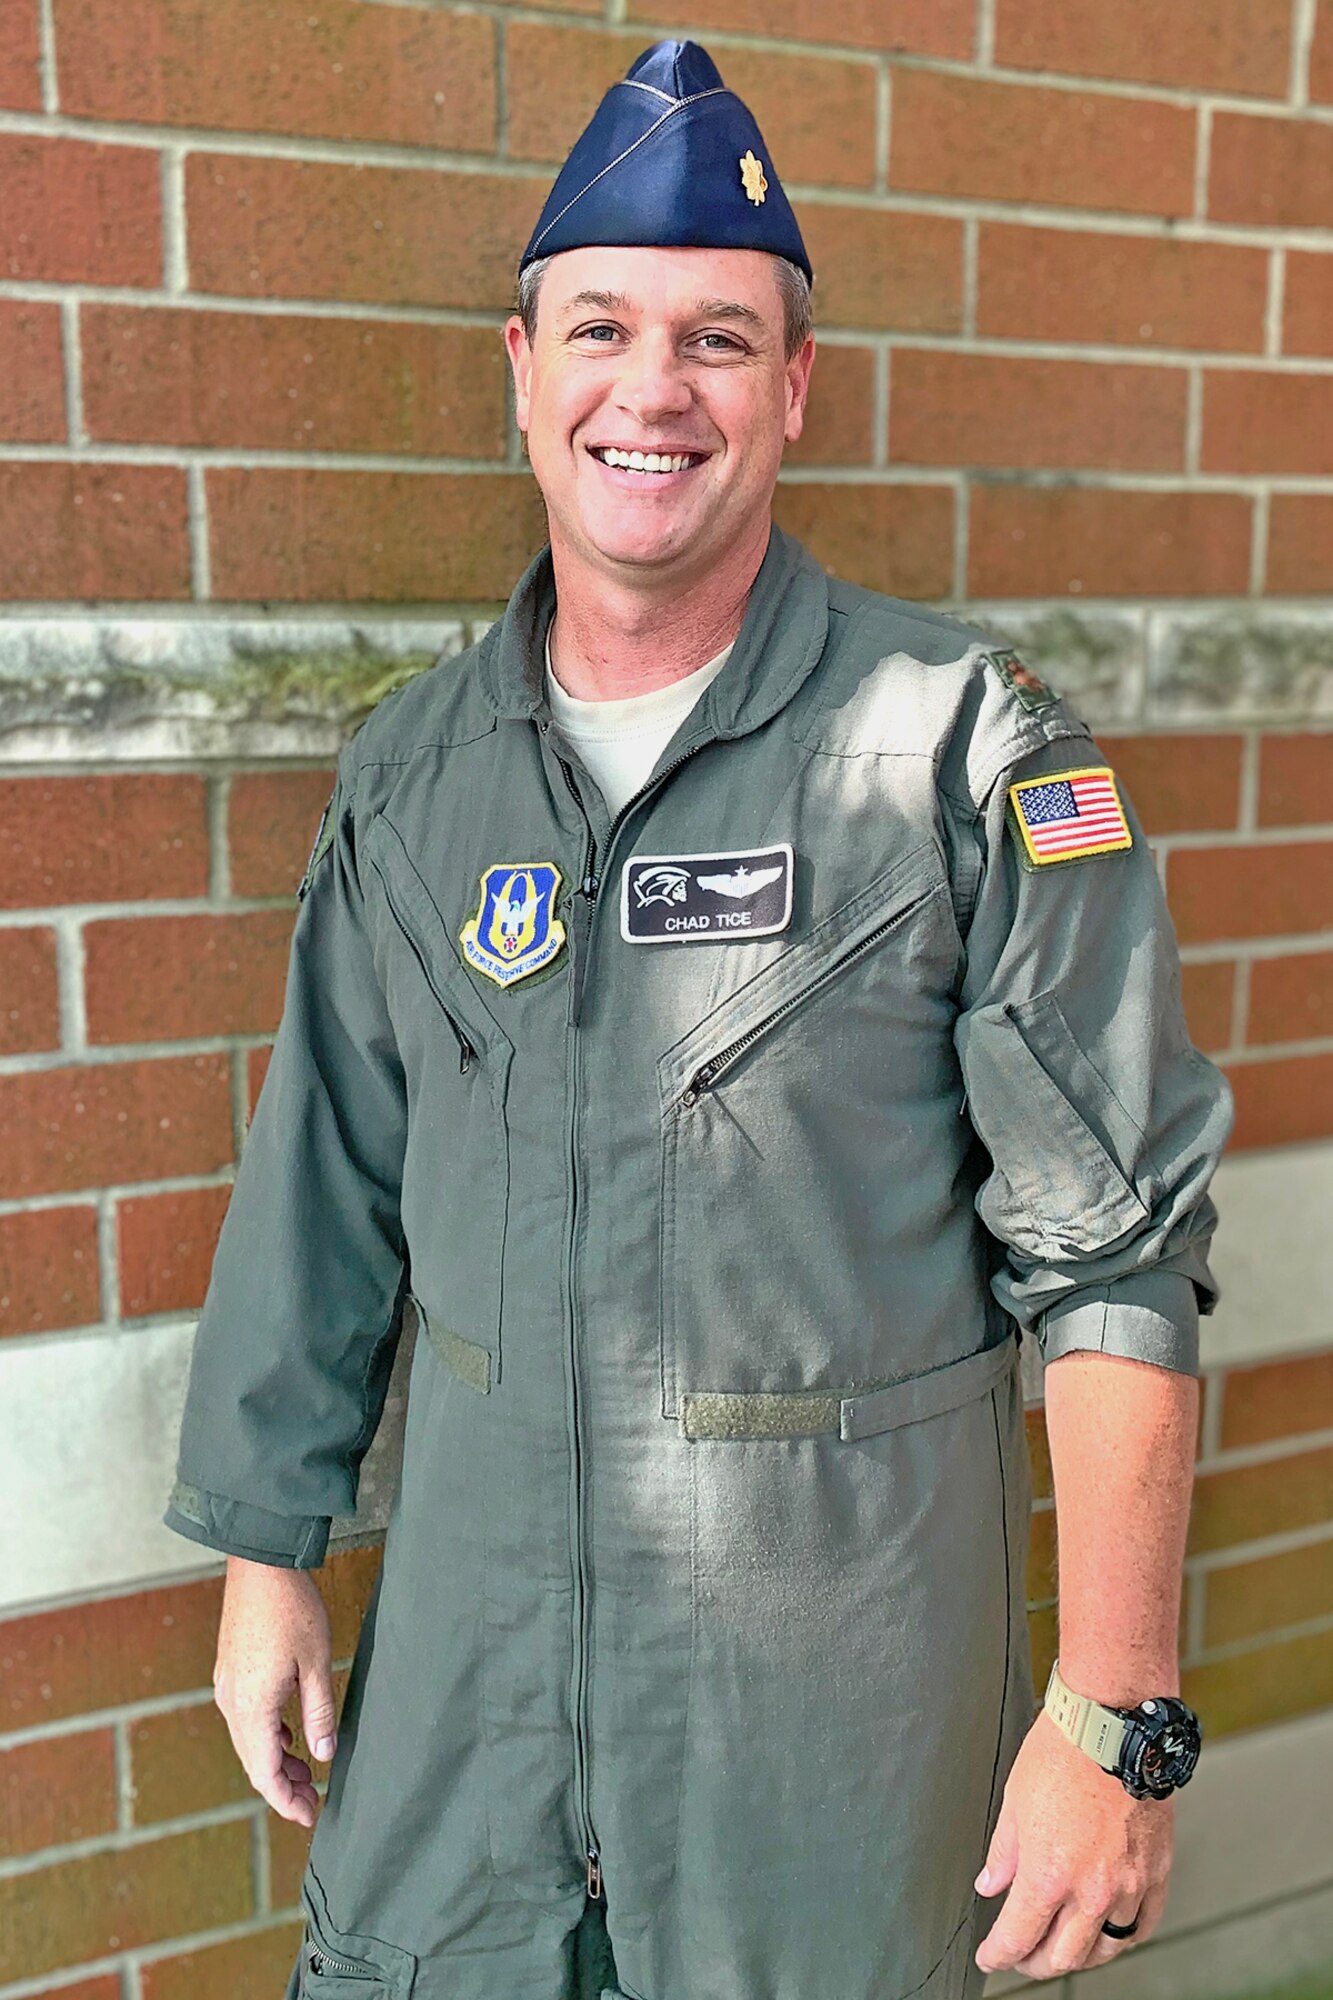 Major Chad Tice, a pilot with the 72nd Air Refueling Squadron, is the Grissom Air and Space Expo executive in charge of parking. The event is scheduled for Sept. 7-8 and will highlighted by the U.S. Air Force Thunderbirds and the Army Golden Knights.